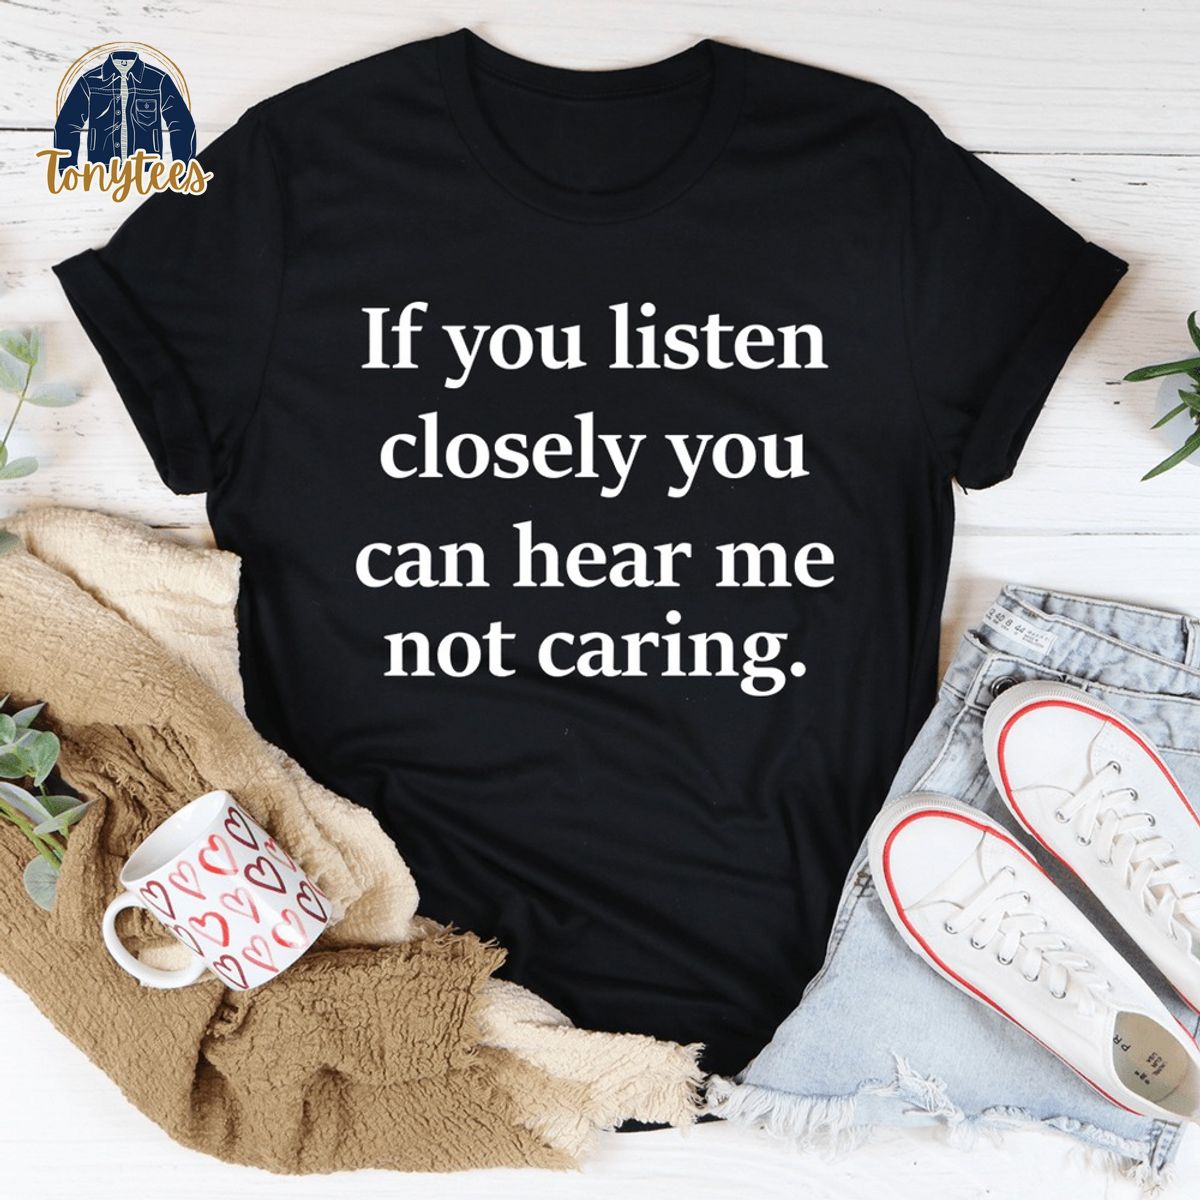 If you listen closely you can hear me not caring shirt